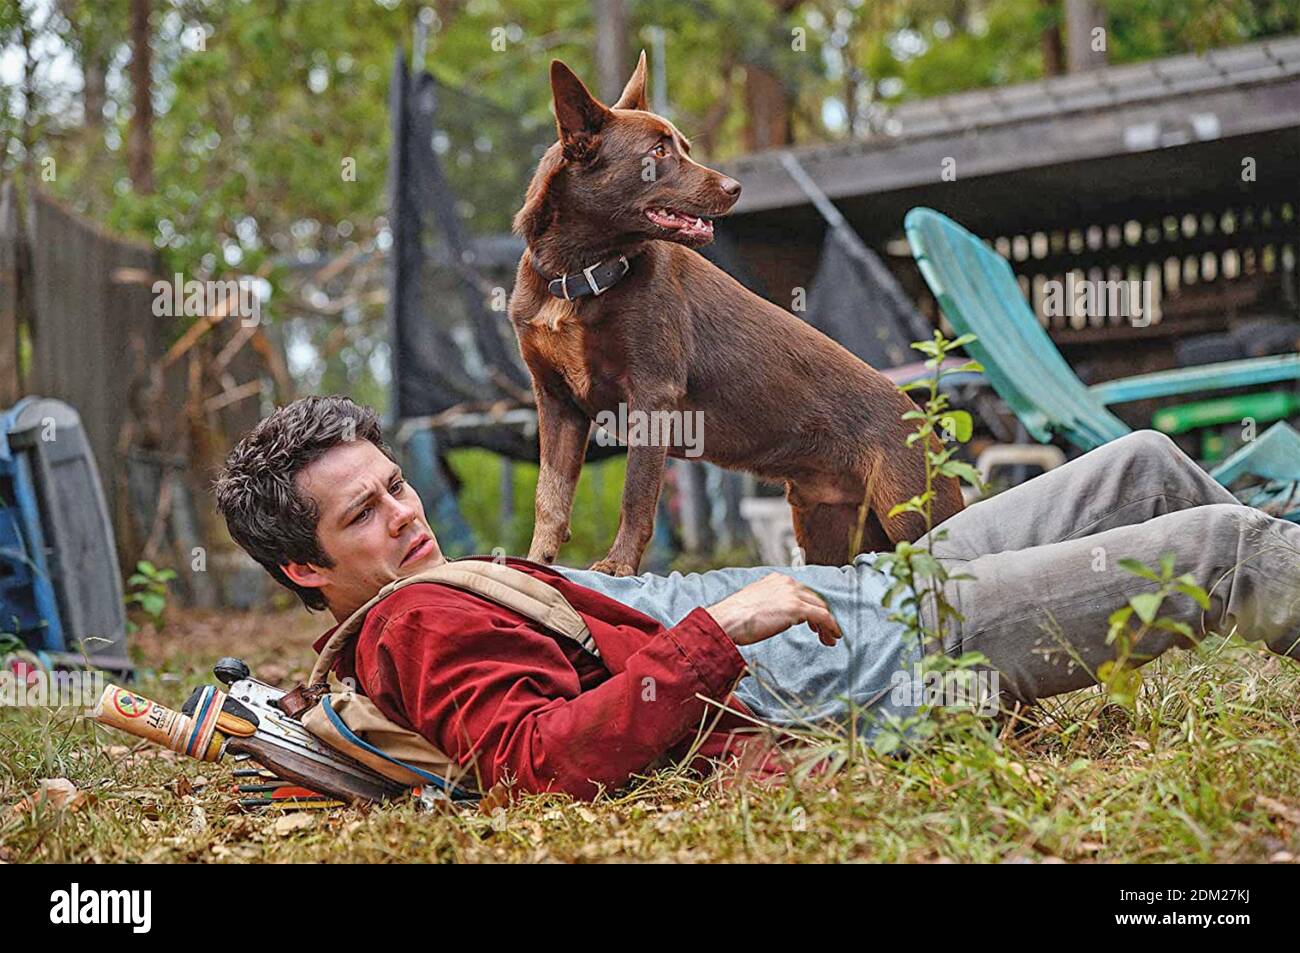 LOVE AND MONSTERS 2020 Paramount Pictures película con Dylan o'Brien Foto de stock